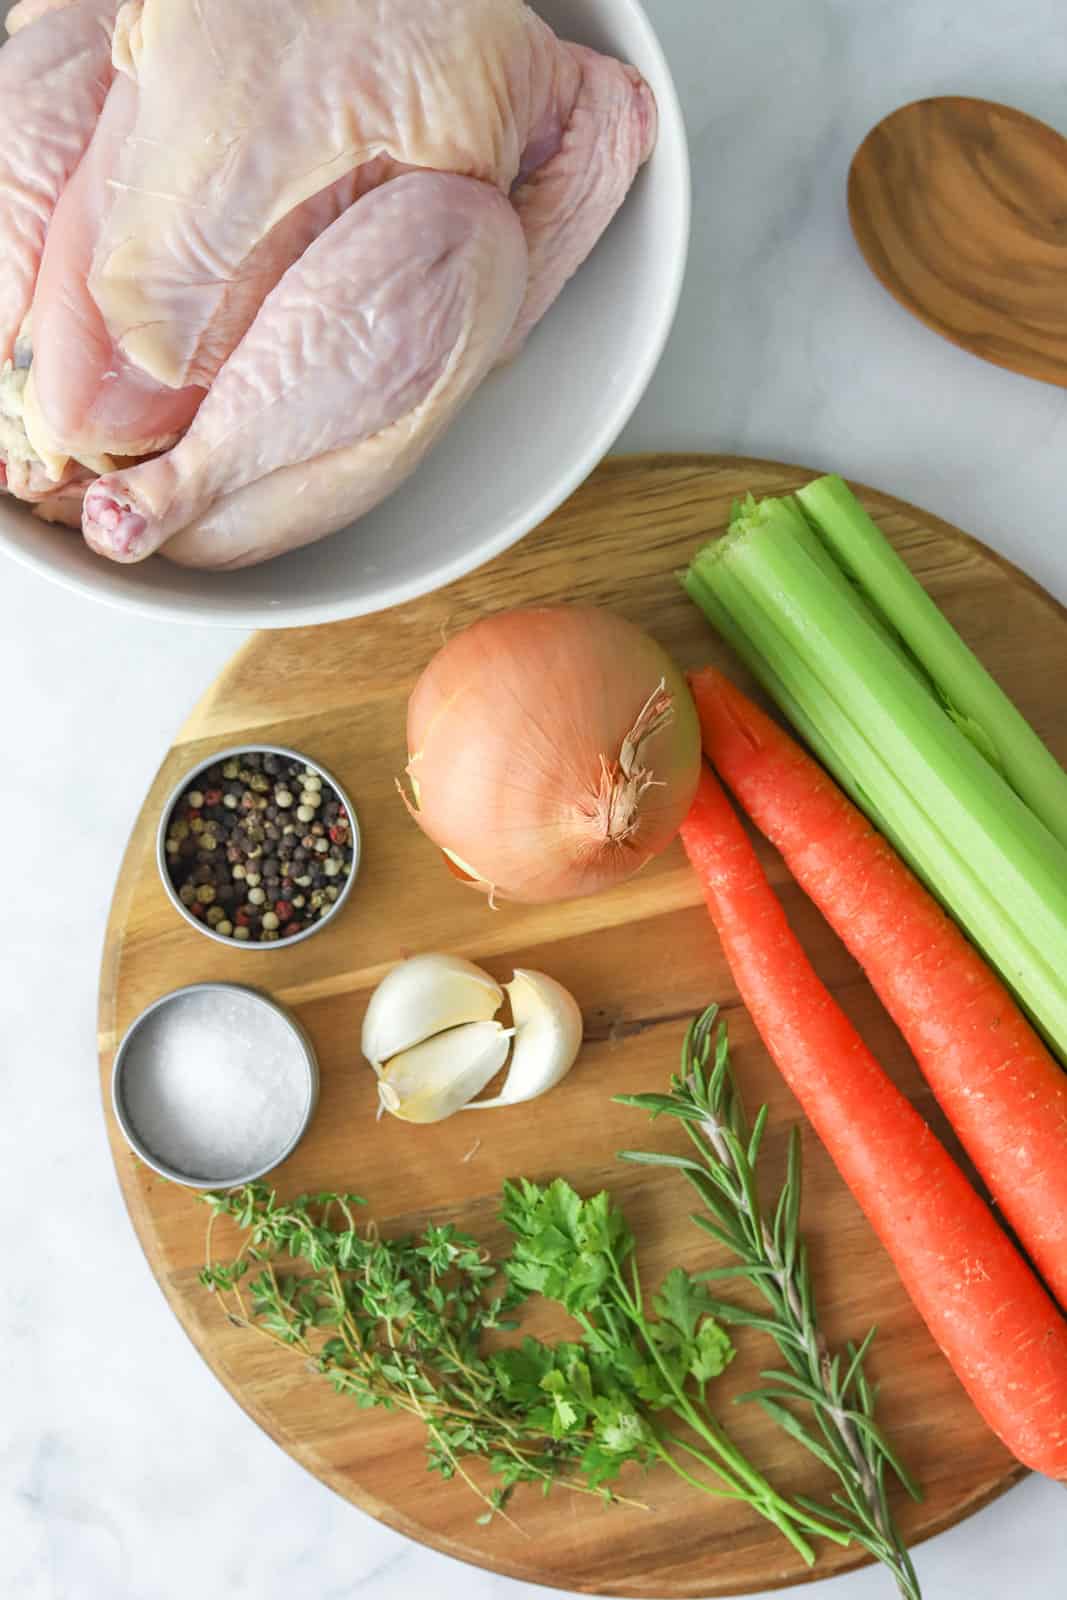 Ingredients needed: whole chicken, celery stIcks, carrots, garlic, onion, cooking oil, water, rosemary, thyme, parsley, bay leaf, whole peppercorns and salt.